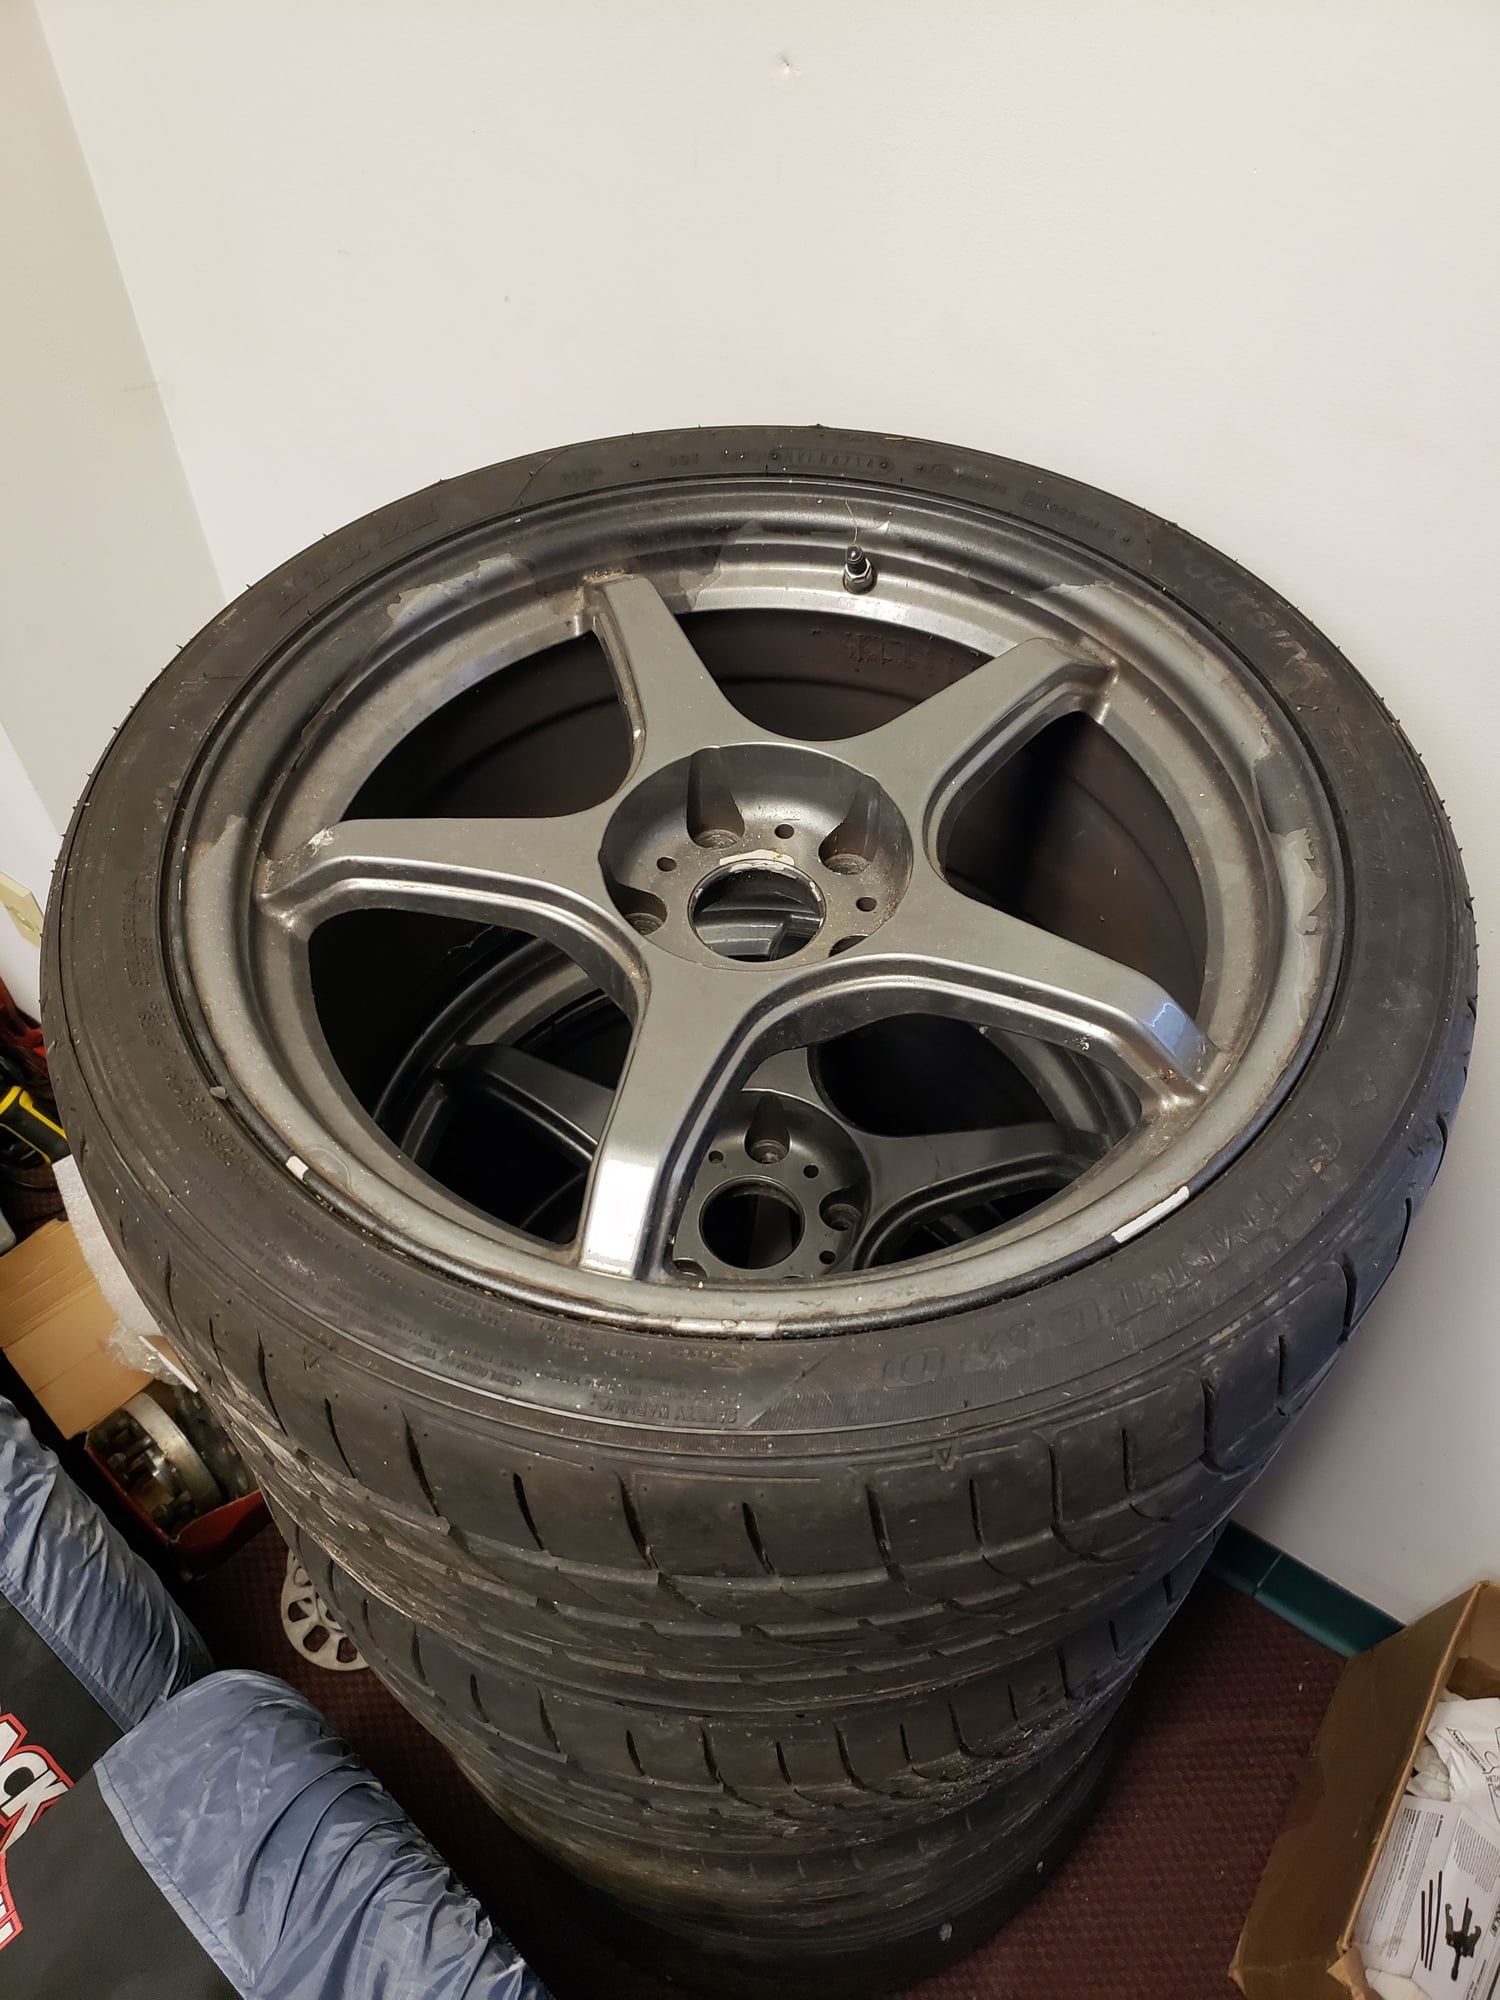 Wheels and Tires/Axles - Dforce rims 18x10 with sumitomo wheels - Used - 2008 to 2019 Mitsubishi Lancer Evolution - 2000 to 2019 Ford Mustang - Queensbury, NY 12804, United States